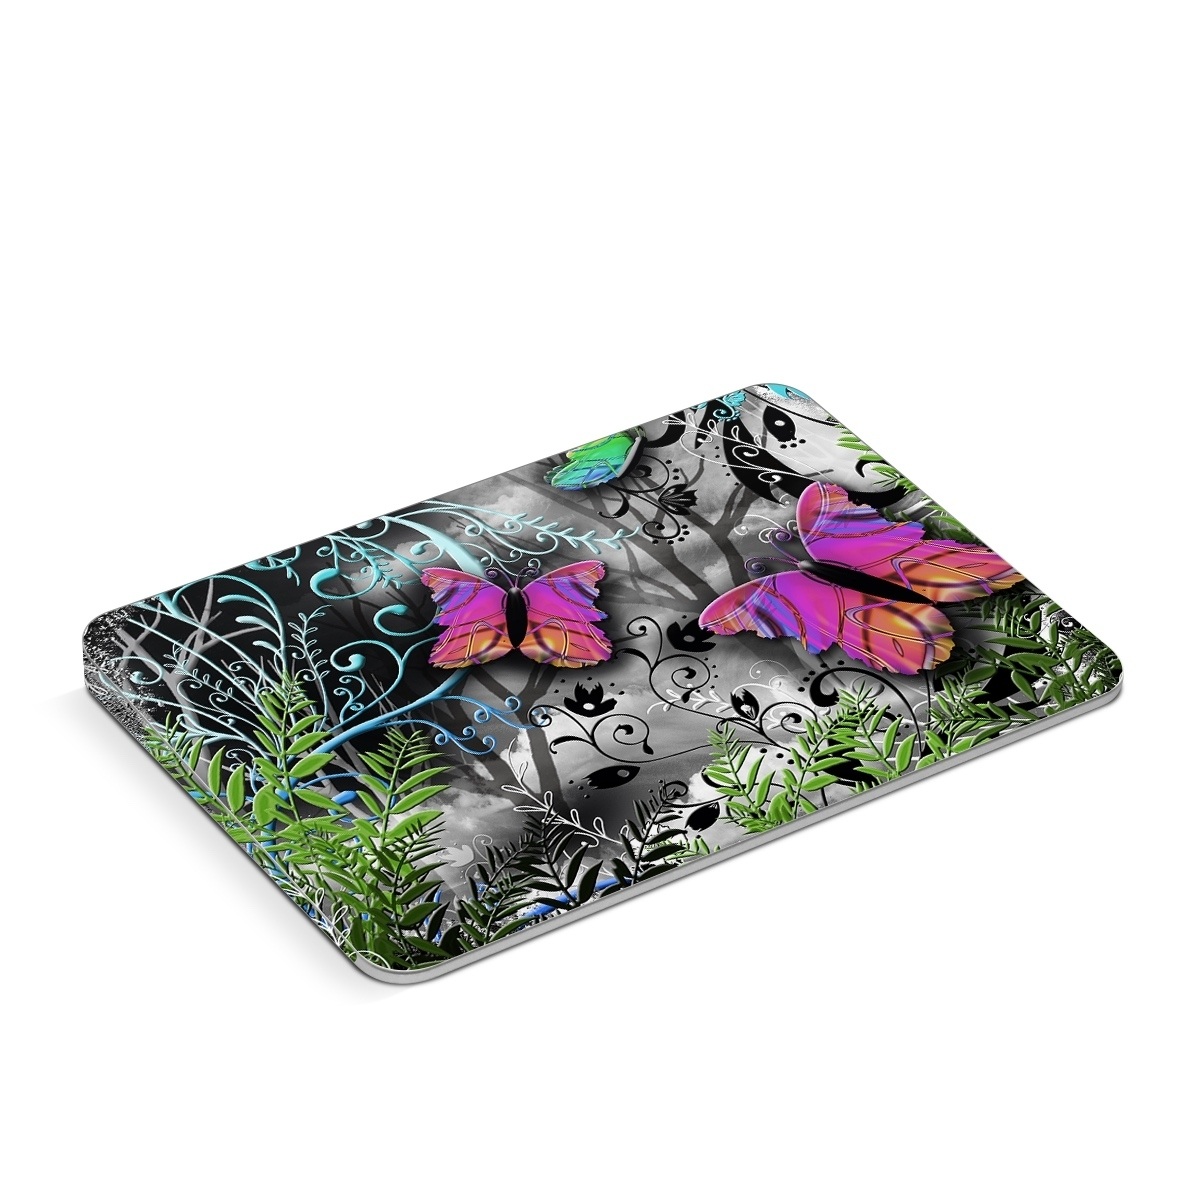 Magic Trackpad Skin - Goth Forest (Image 1)